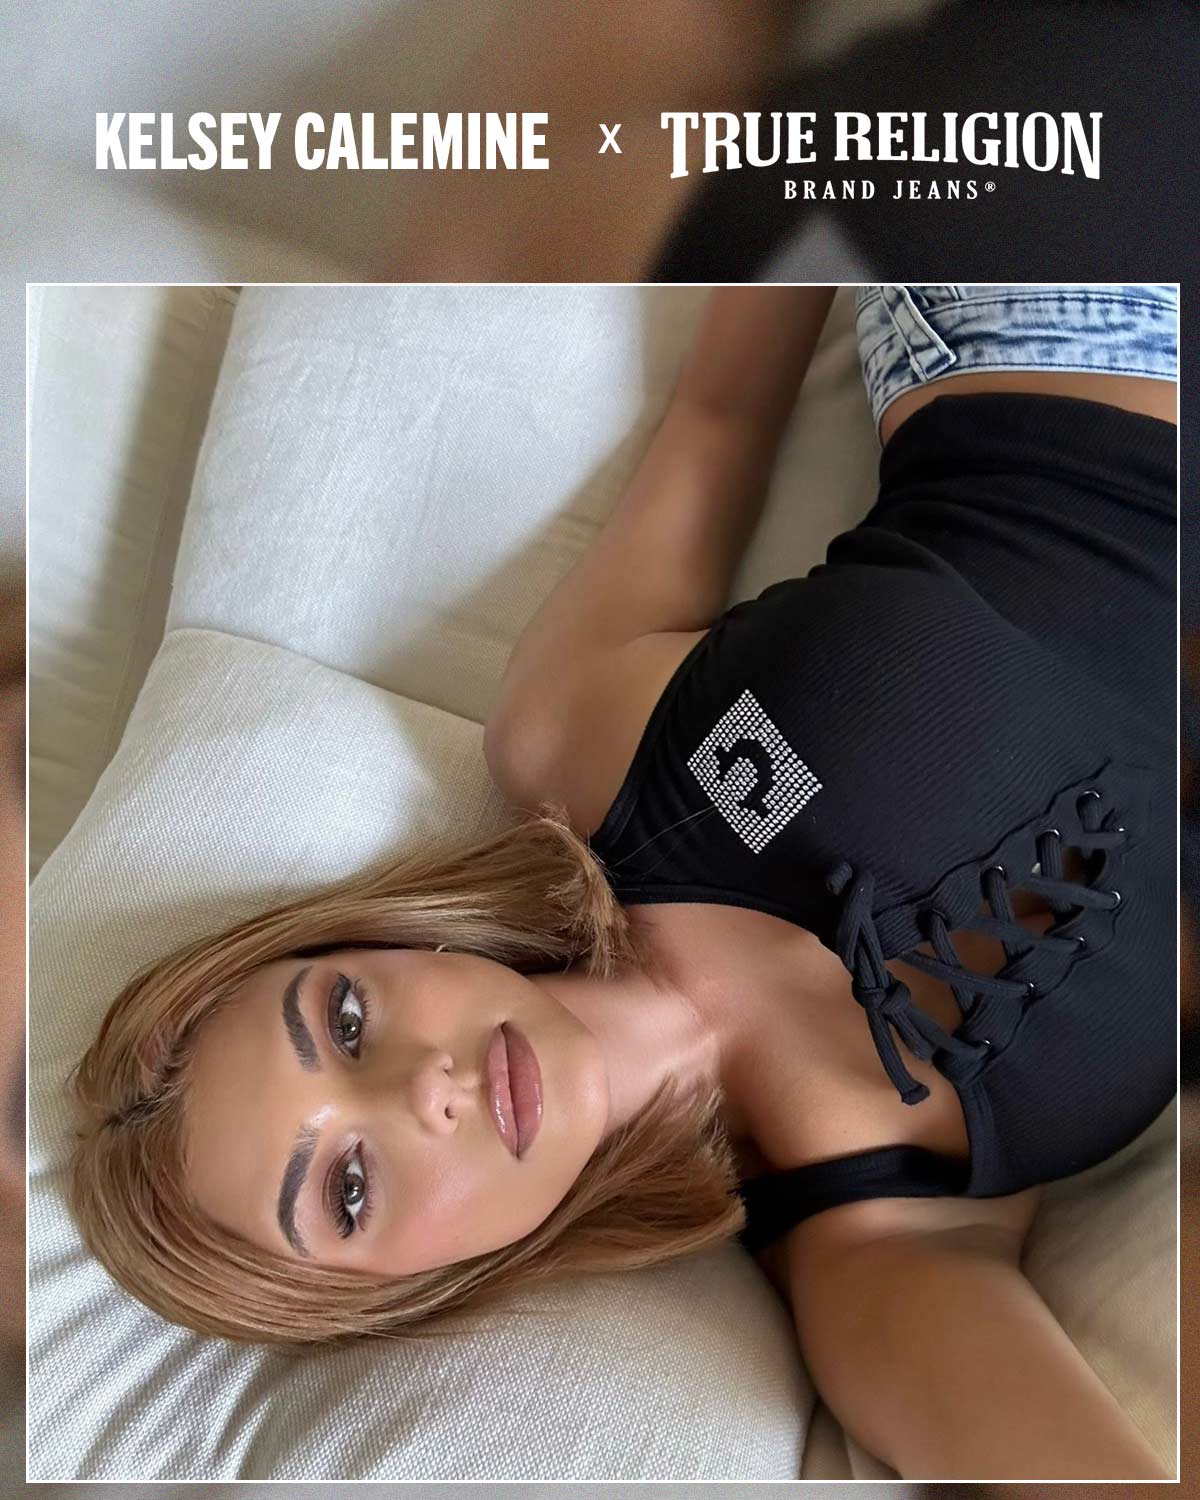 Kelsey Calemine and True Religion.